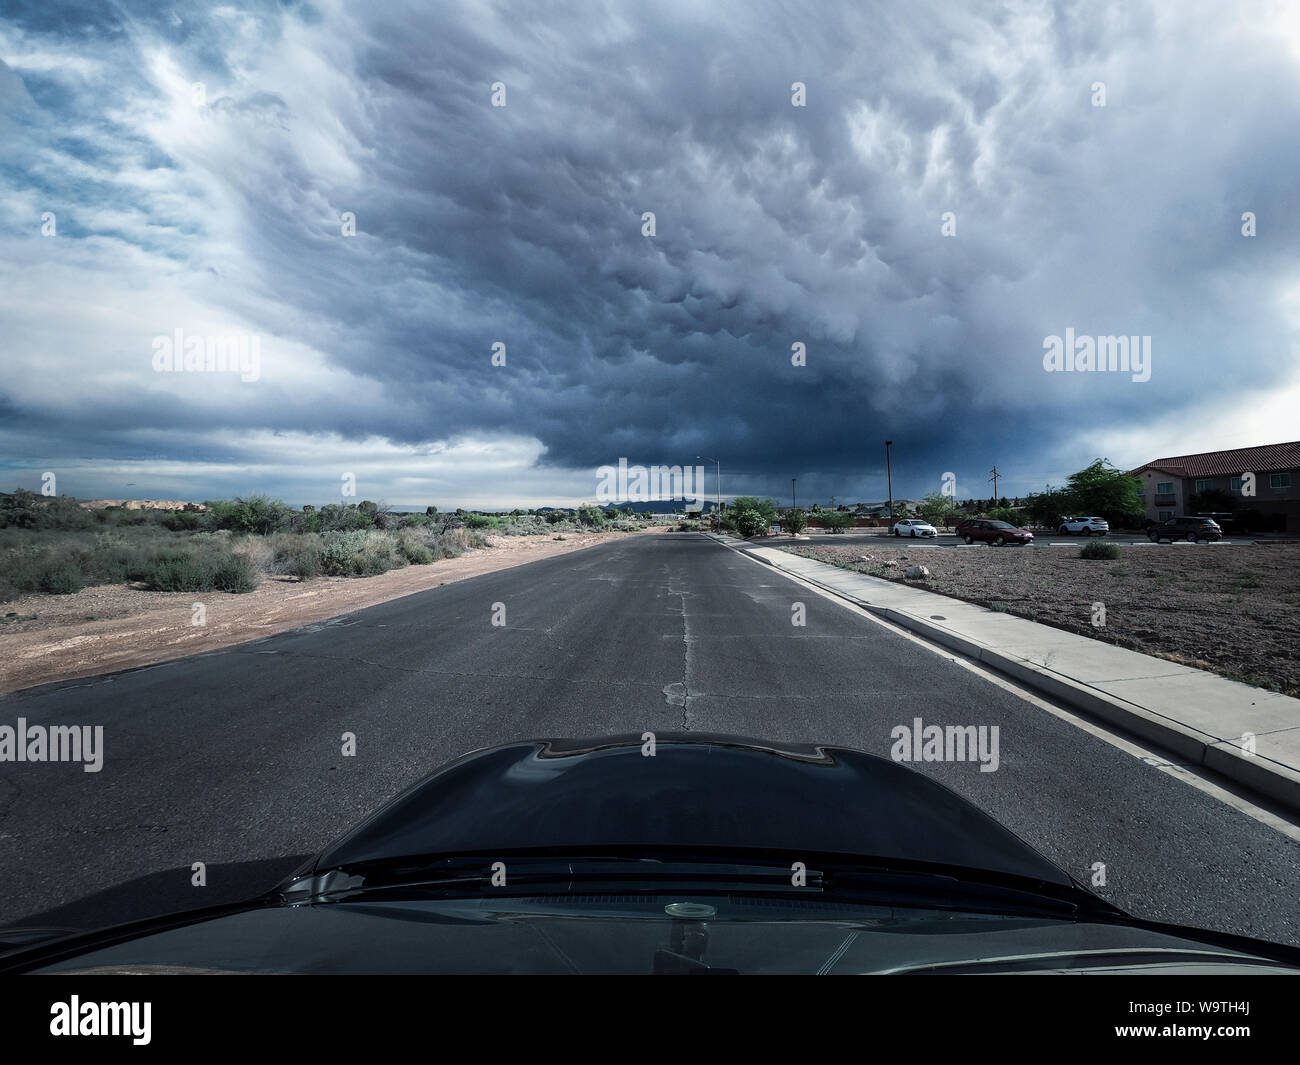 Car driving along a road with a storm approaching, Moapa valley, Nevada, United States Stock Photo